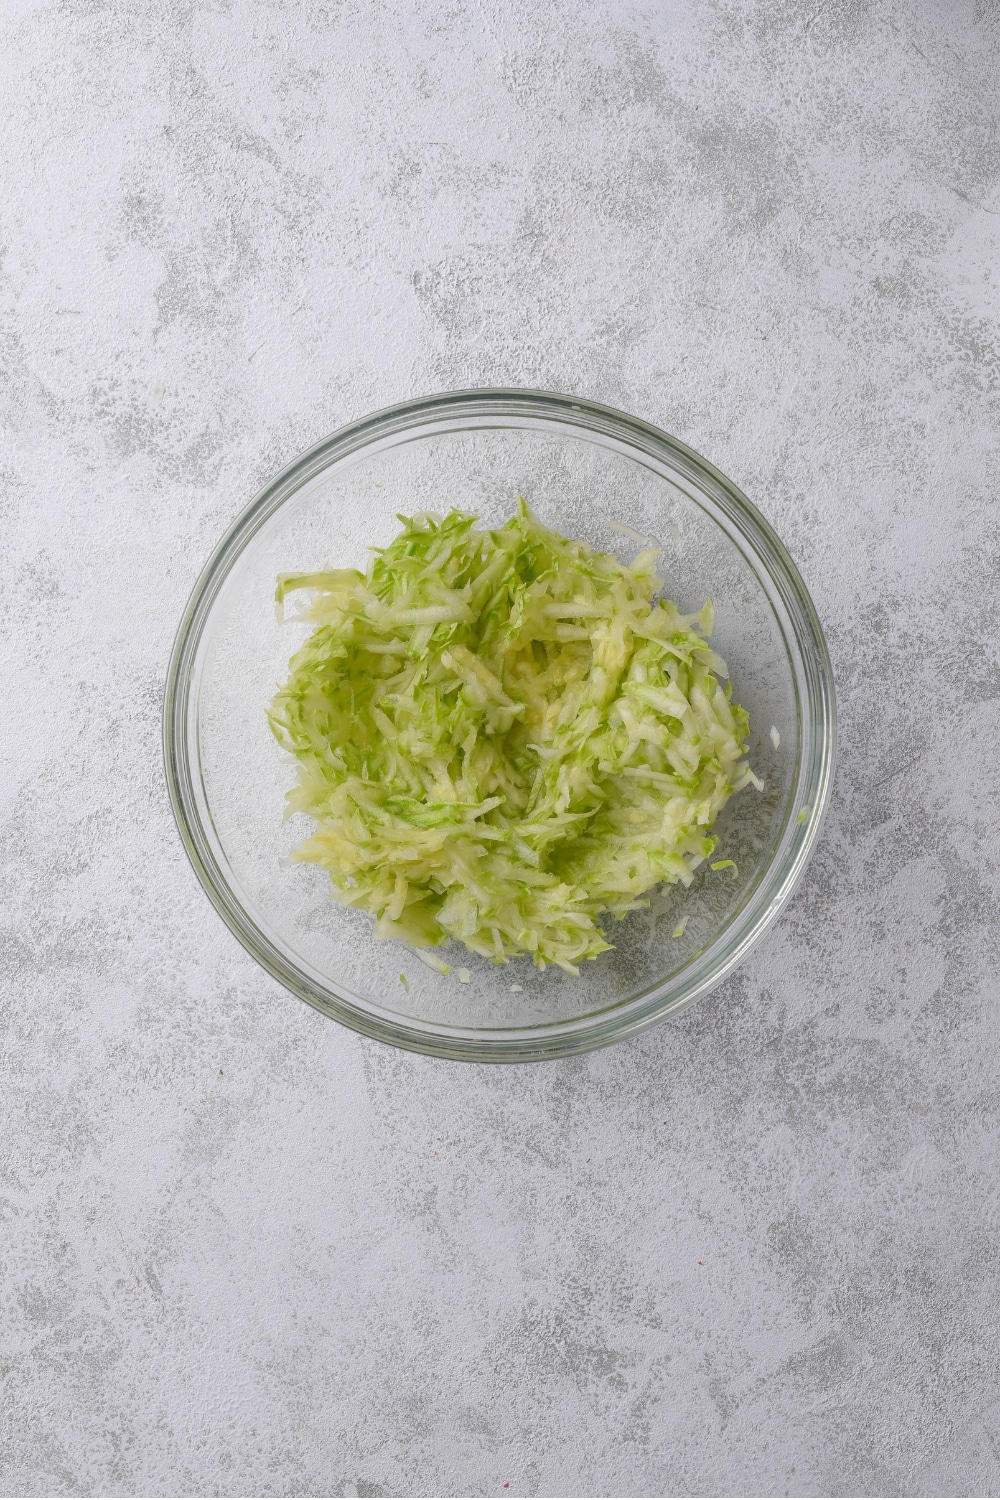 A glass bowl filled with shredded zucchini.